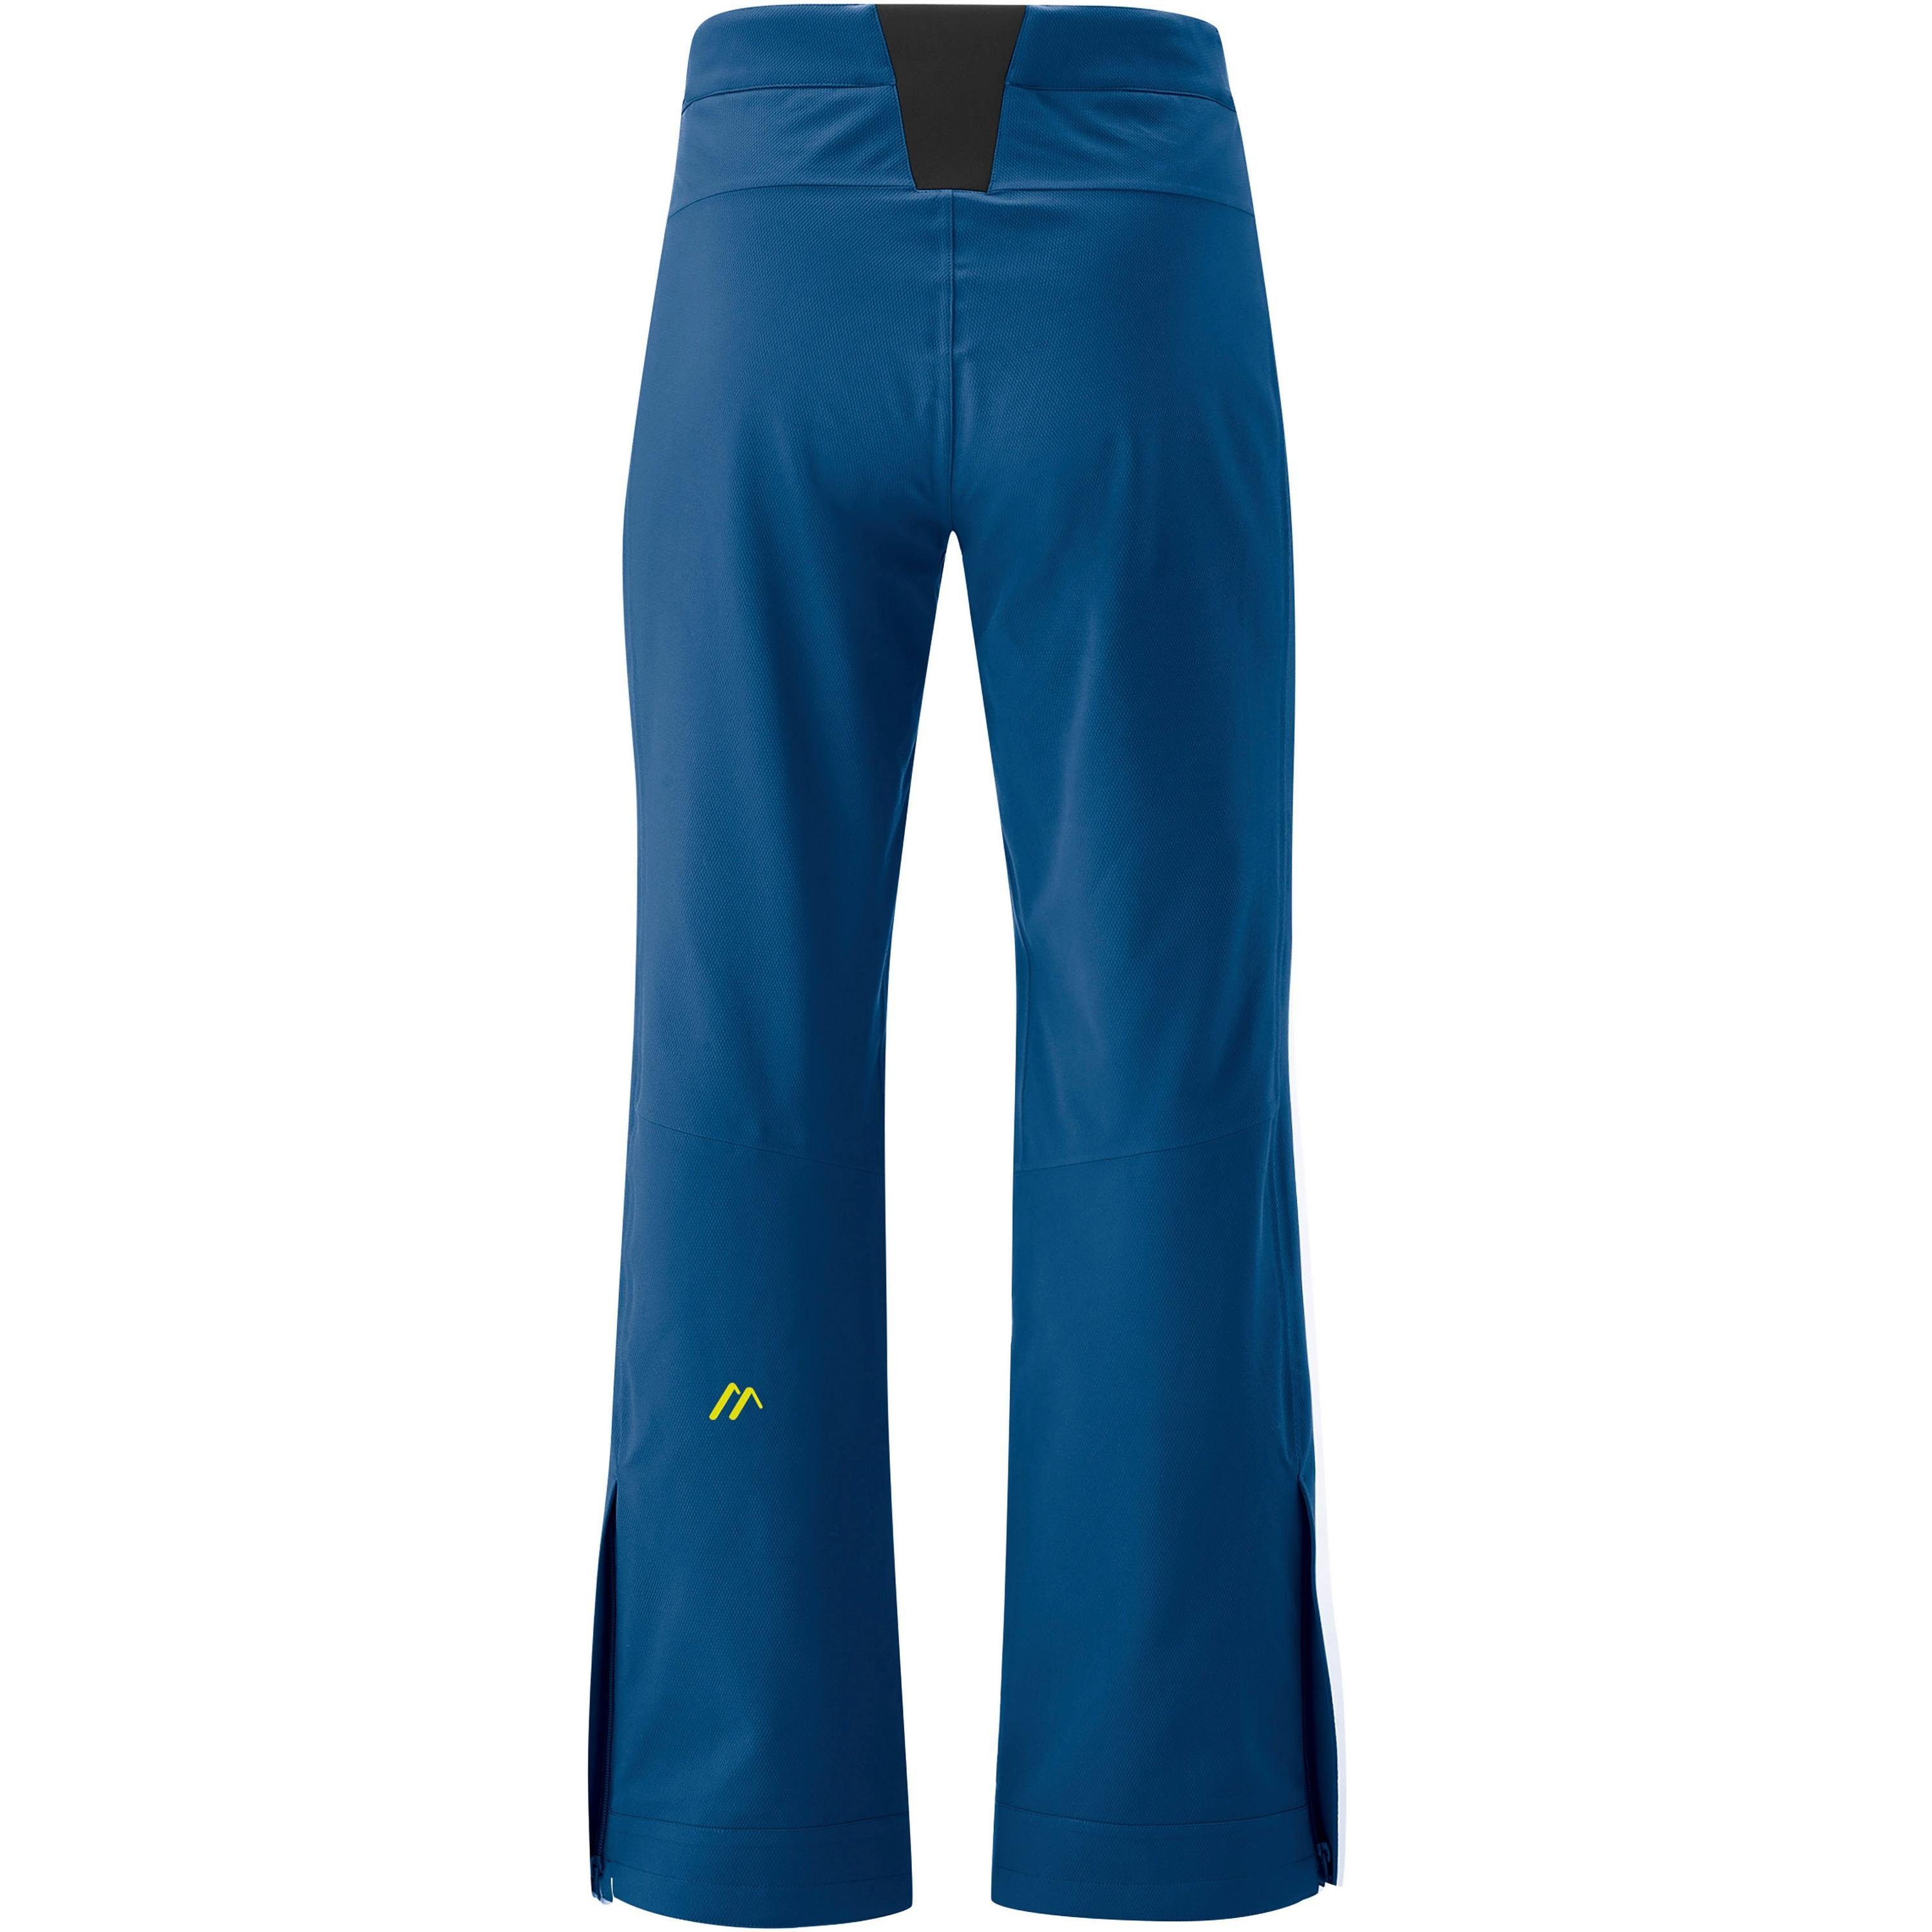 Skihose Movement Maier blue mostly mid Sports Fast